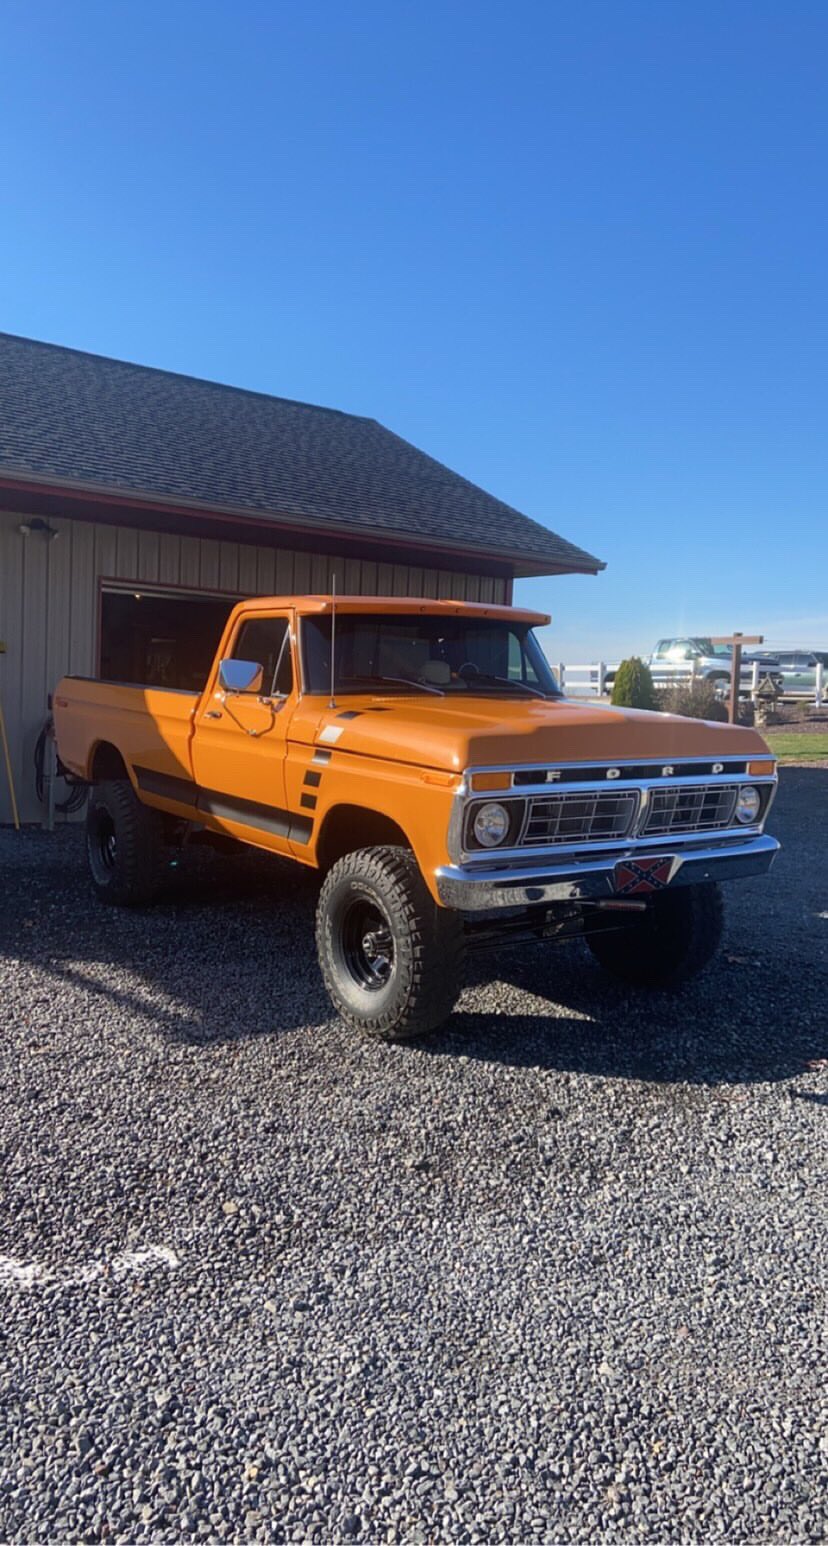 1977 Ford F150 Story About Truck Owner Caleb Yoder 4.jpg